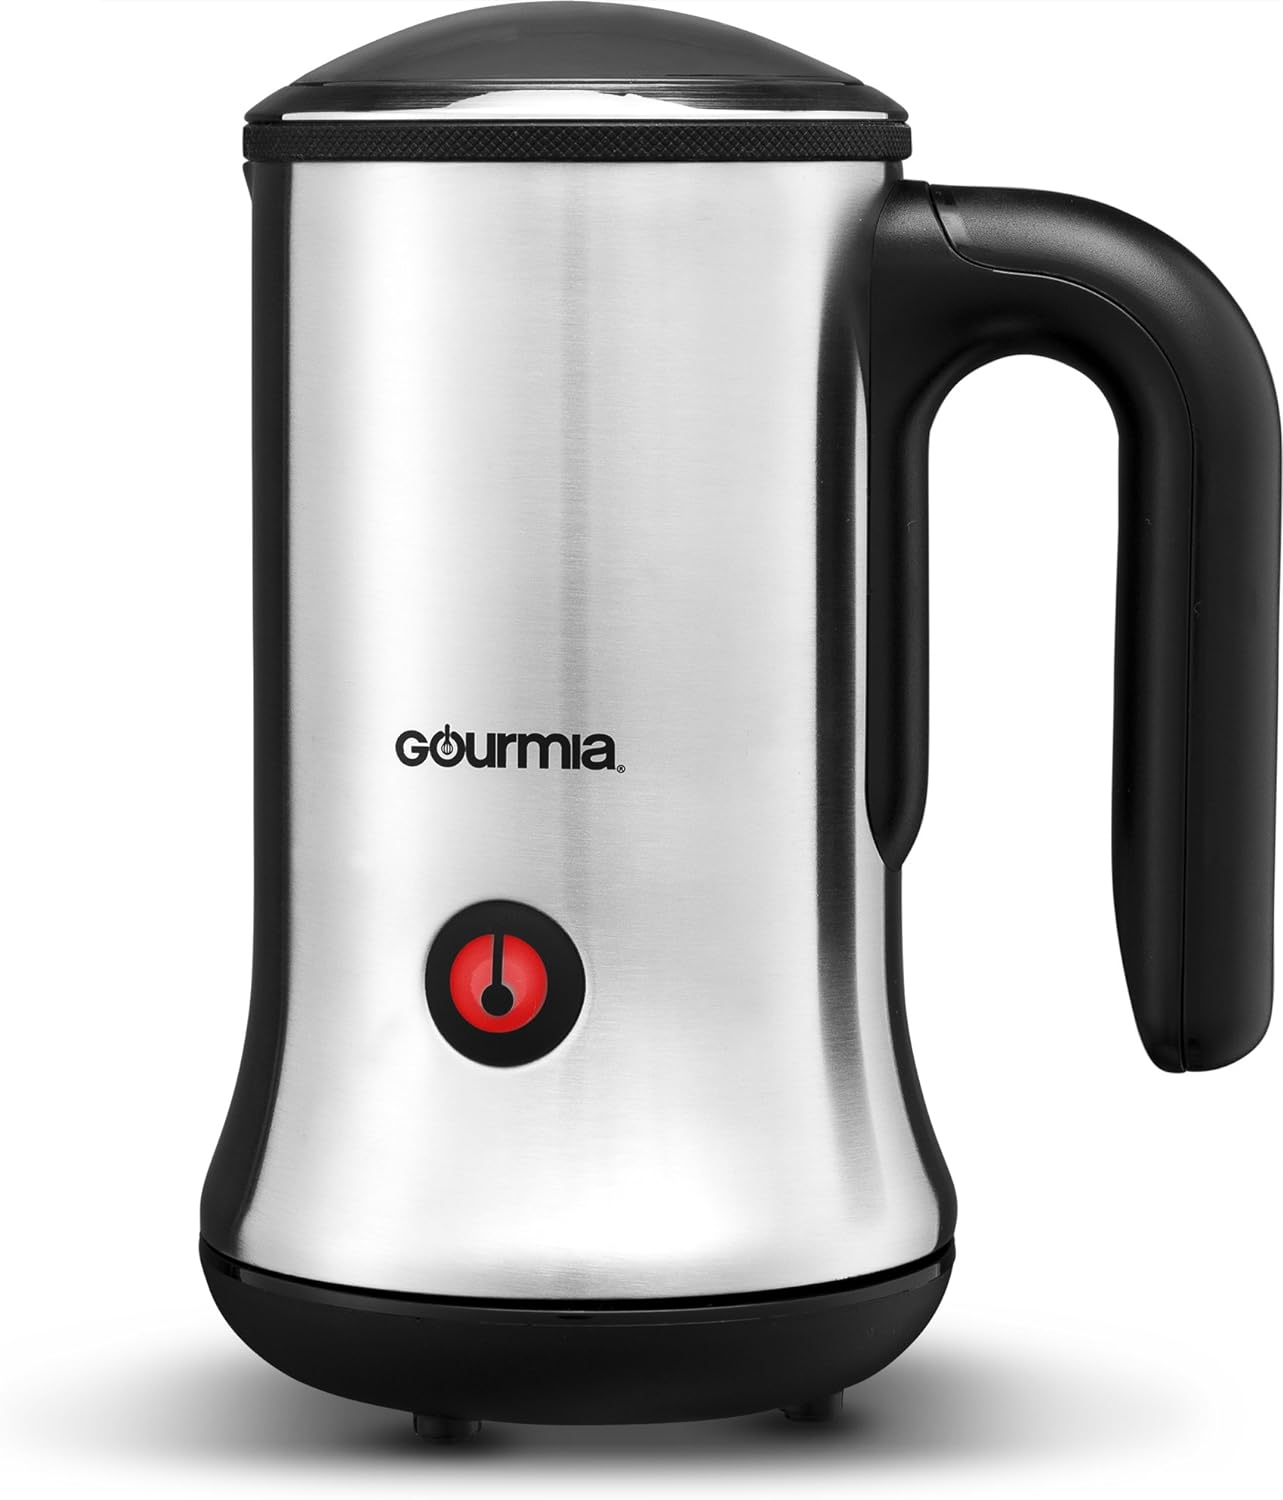 Gourmia Cordless Electric Milk Frother & Heater, Stainless Steel 3 Function Froth Maker for Lattes and Cappuccinos, and Milk Heater (Refurbished - 90 Days Warranty)